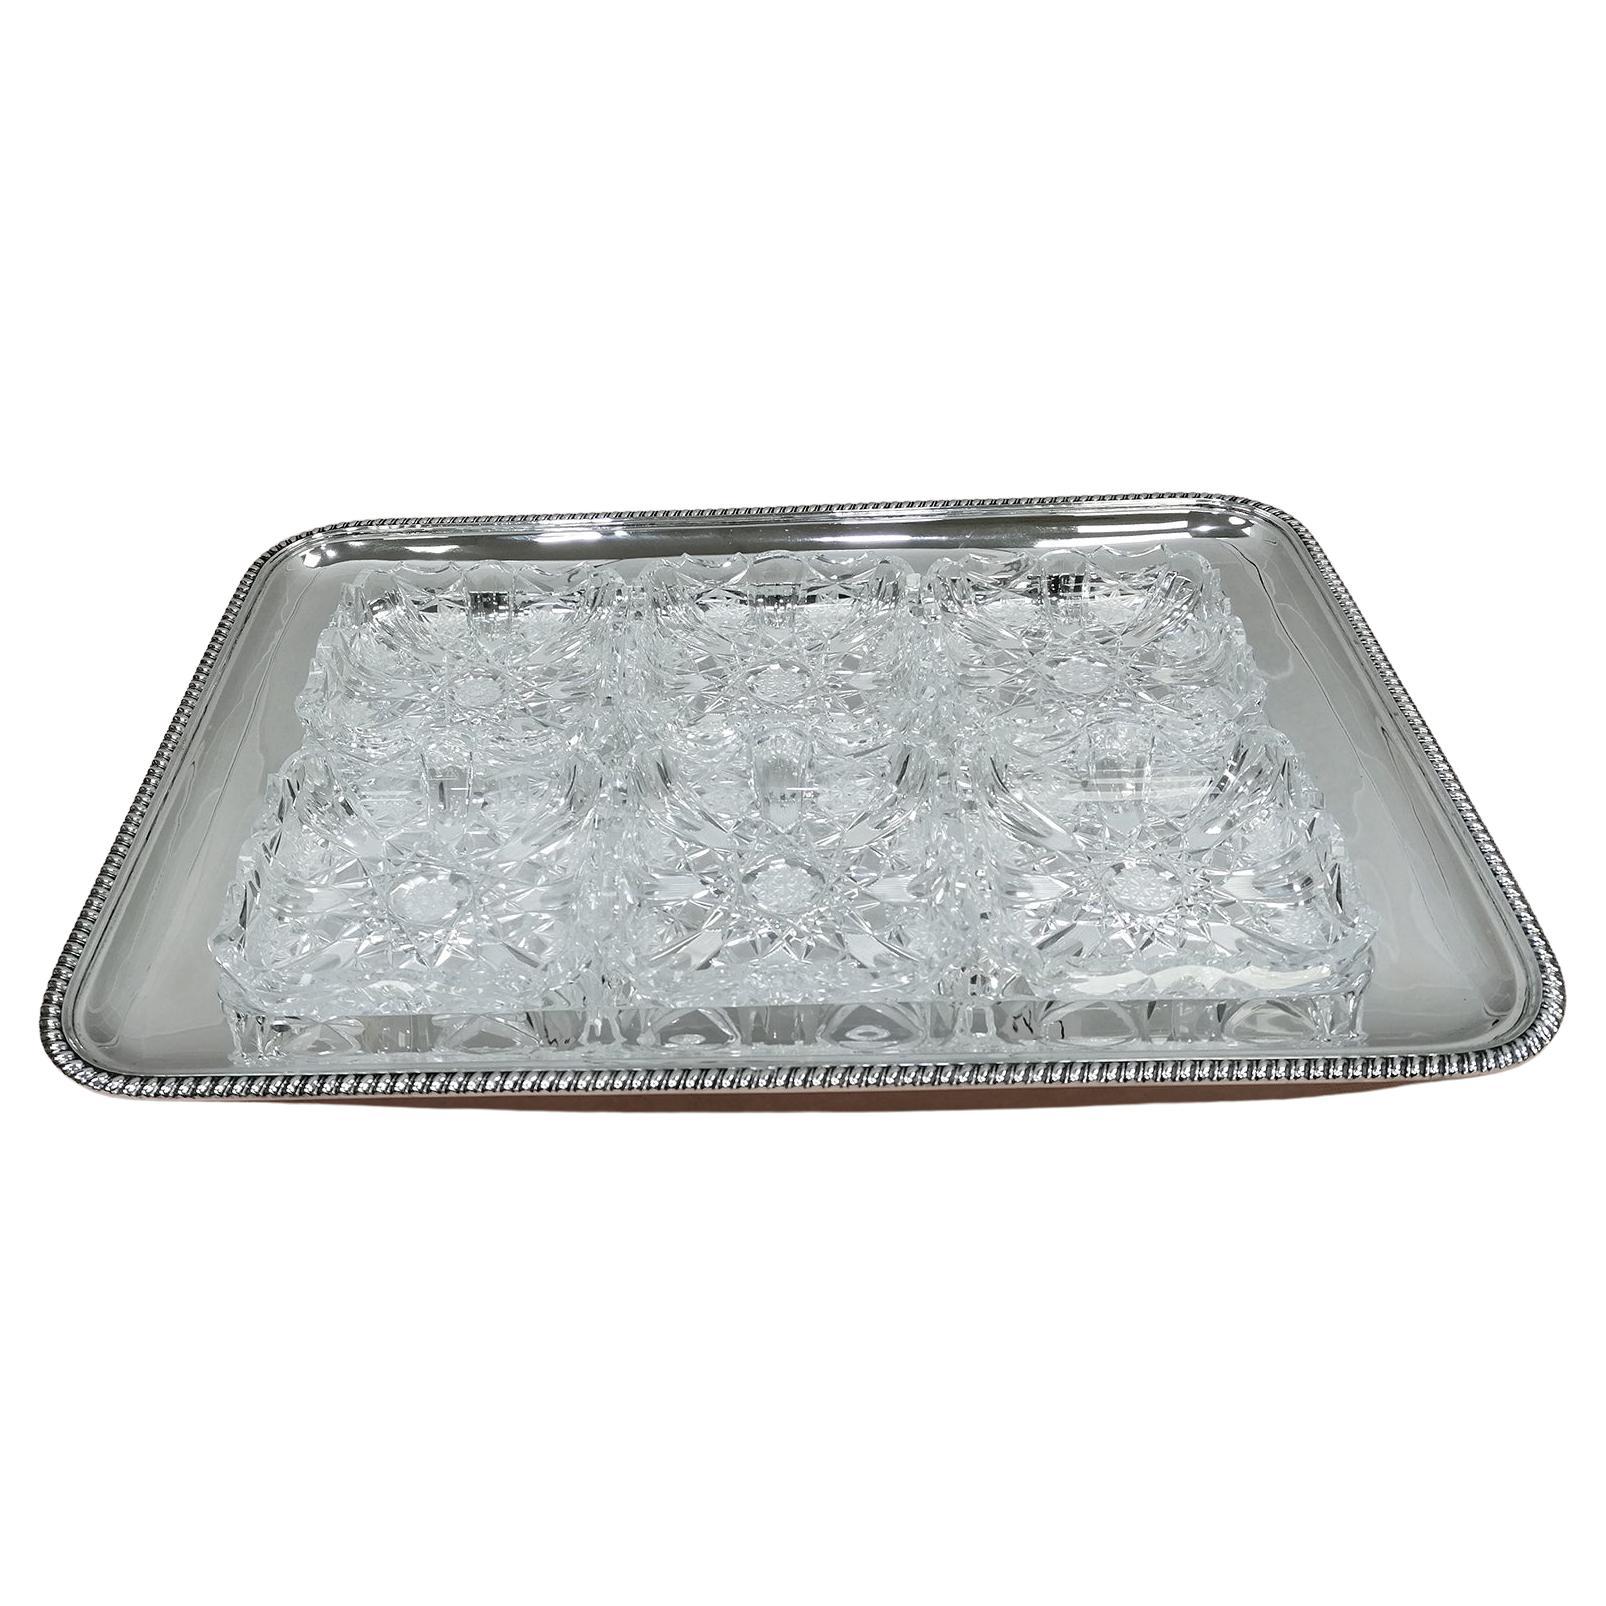 20th Century Italia Solid Silver Appetizer Tray with 6 Crystals